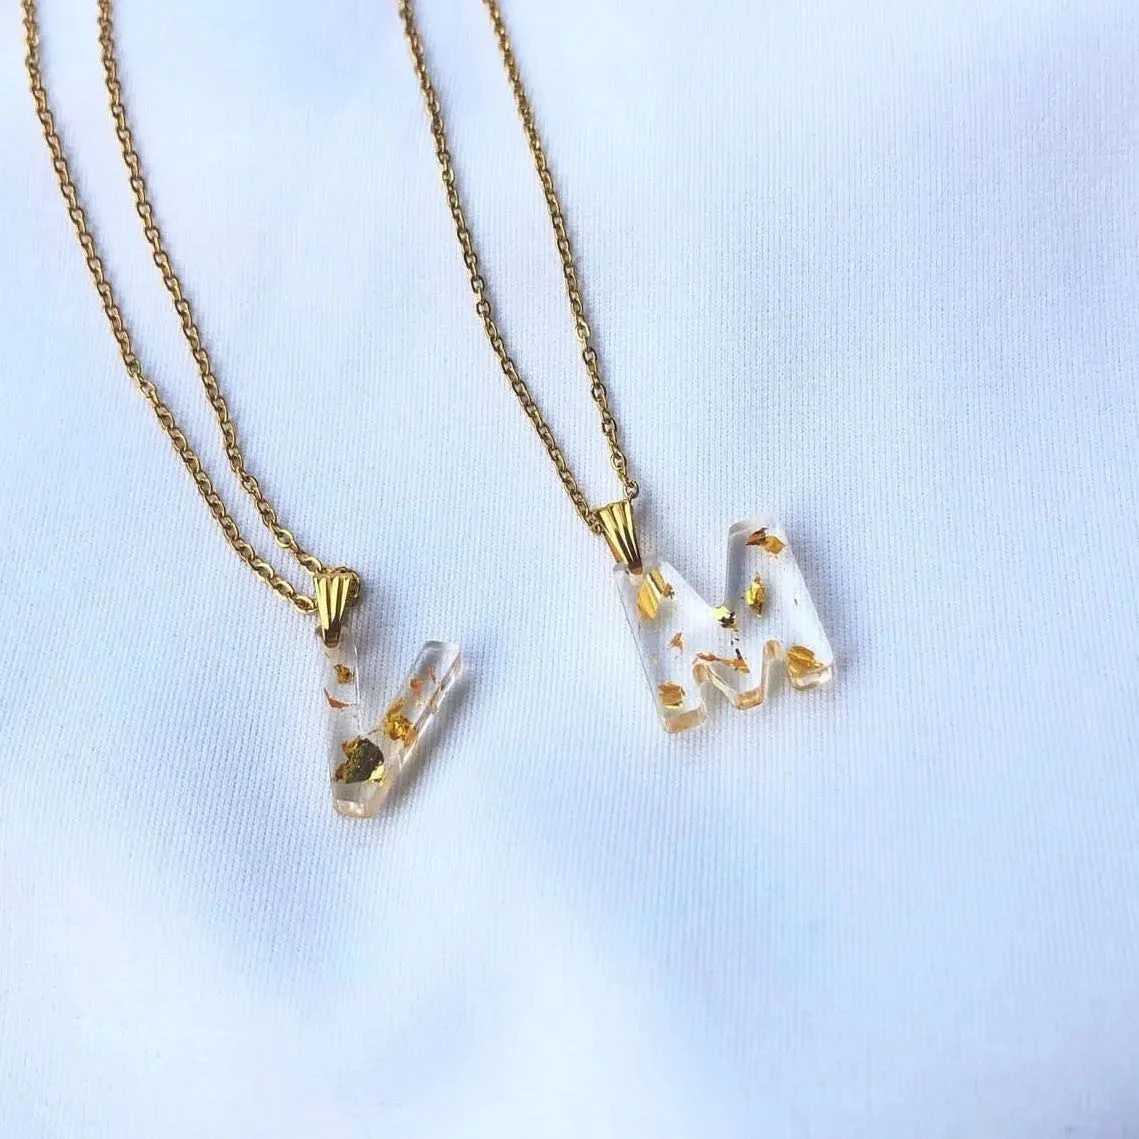 greenbone initial necklace 🍃